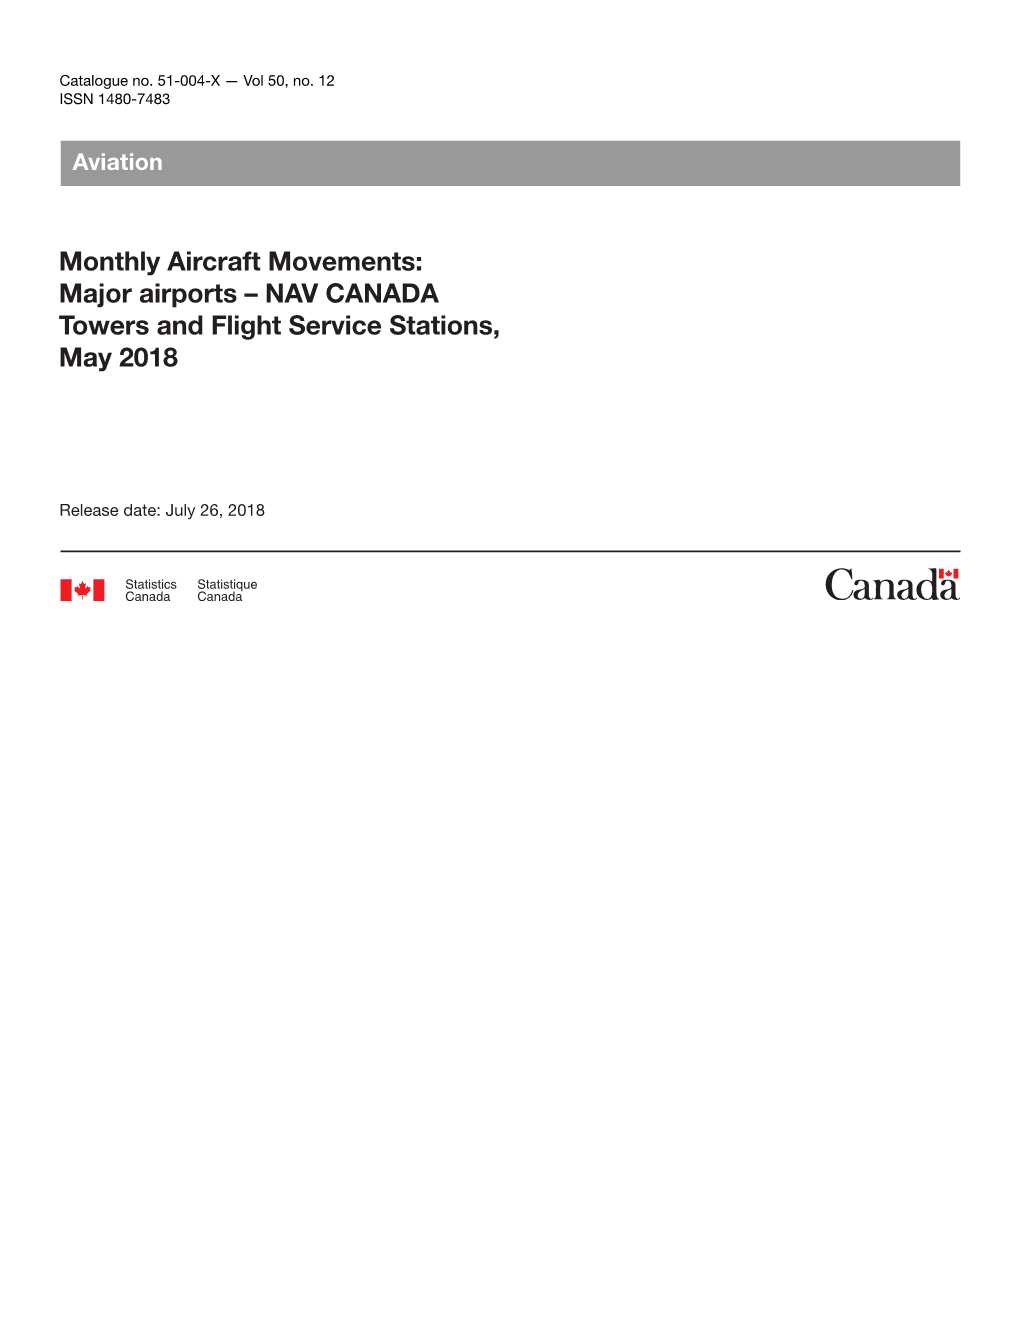 Monthly Aircraft Movements: Major Airports – NAV CANADA Towers and Flight Service Stations, May 2018